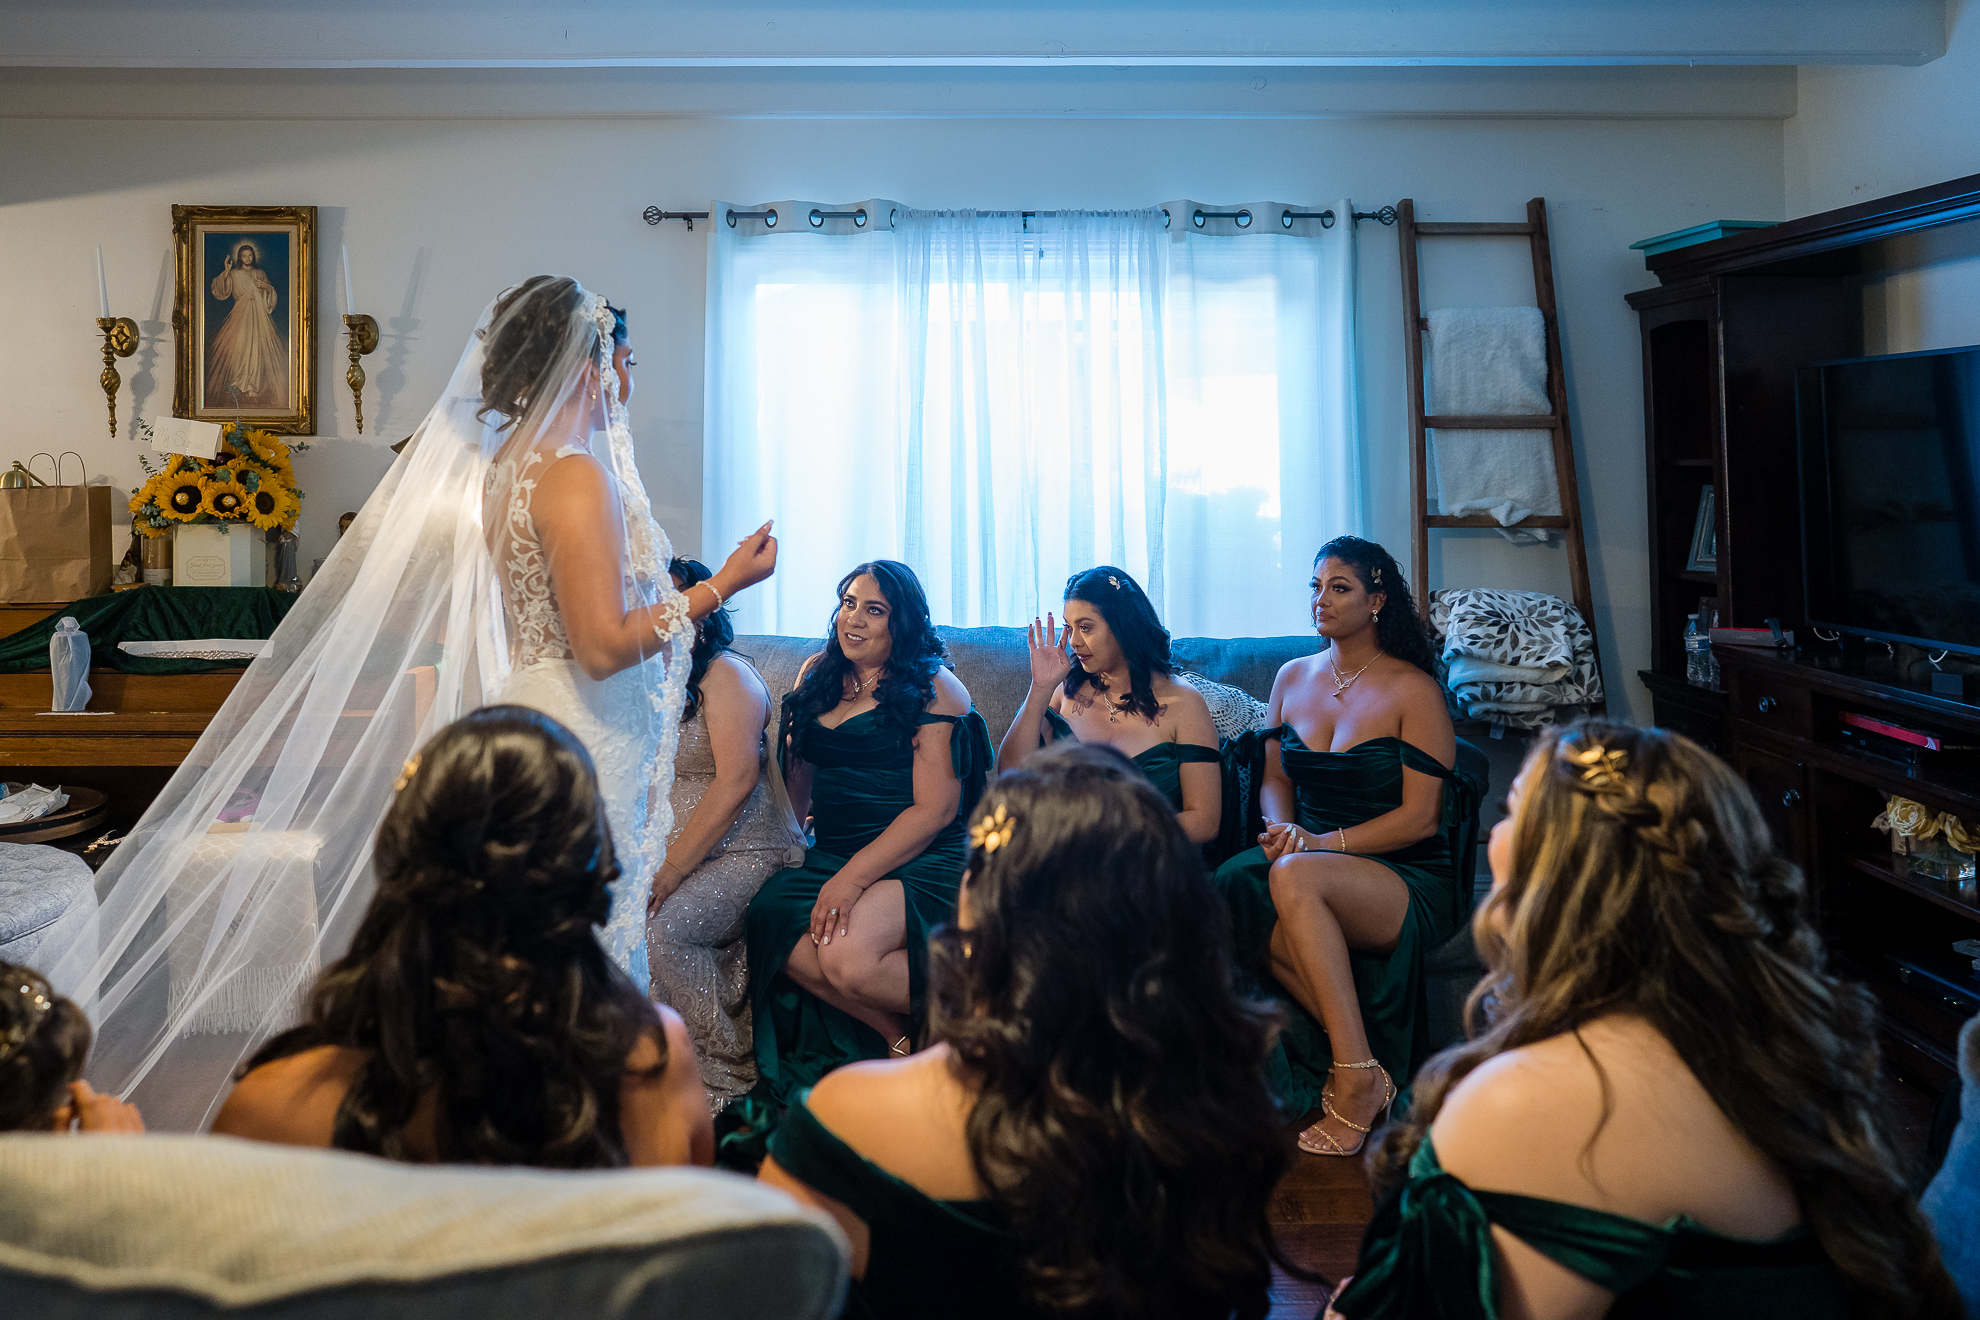 ThomasKim_photography A bride and her bridesmaids in a living room, showing the bond between S & A.